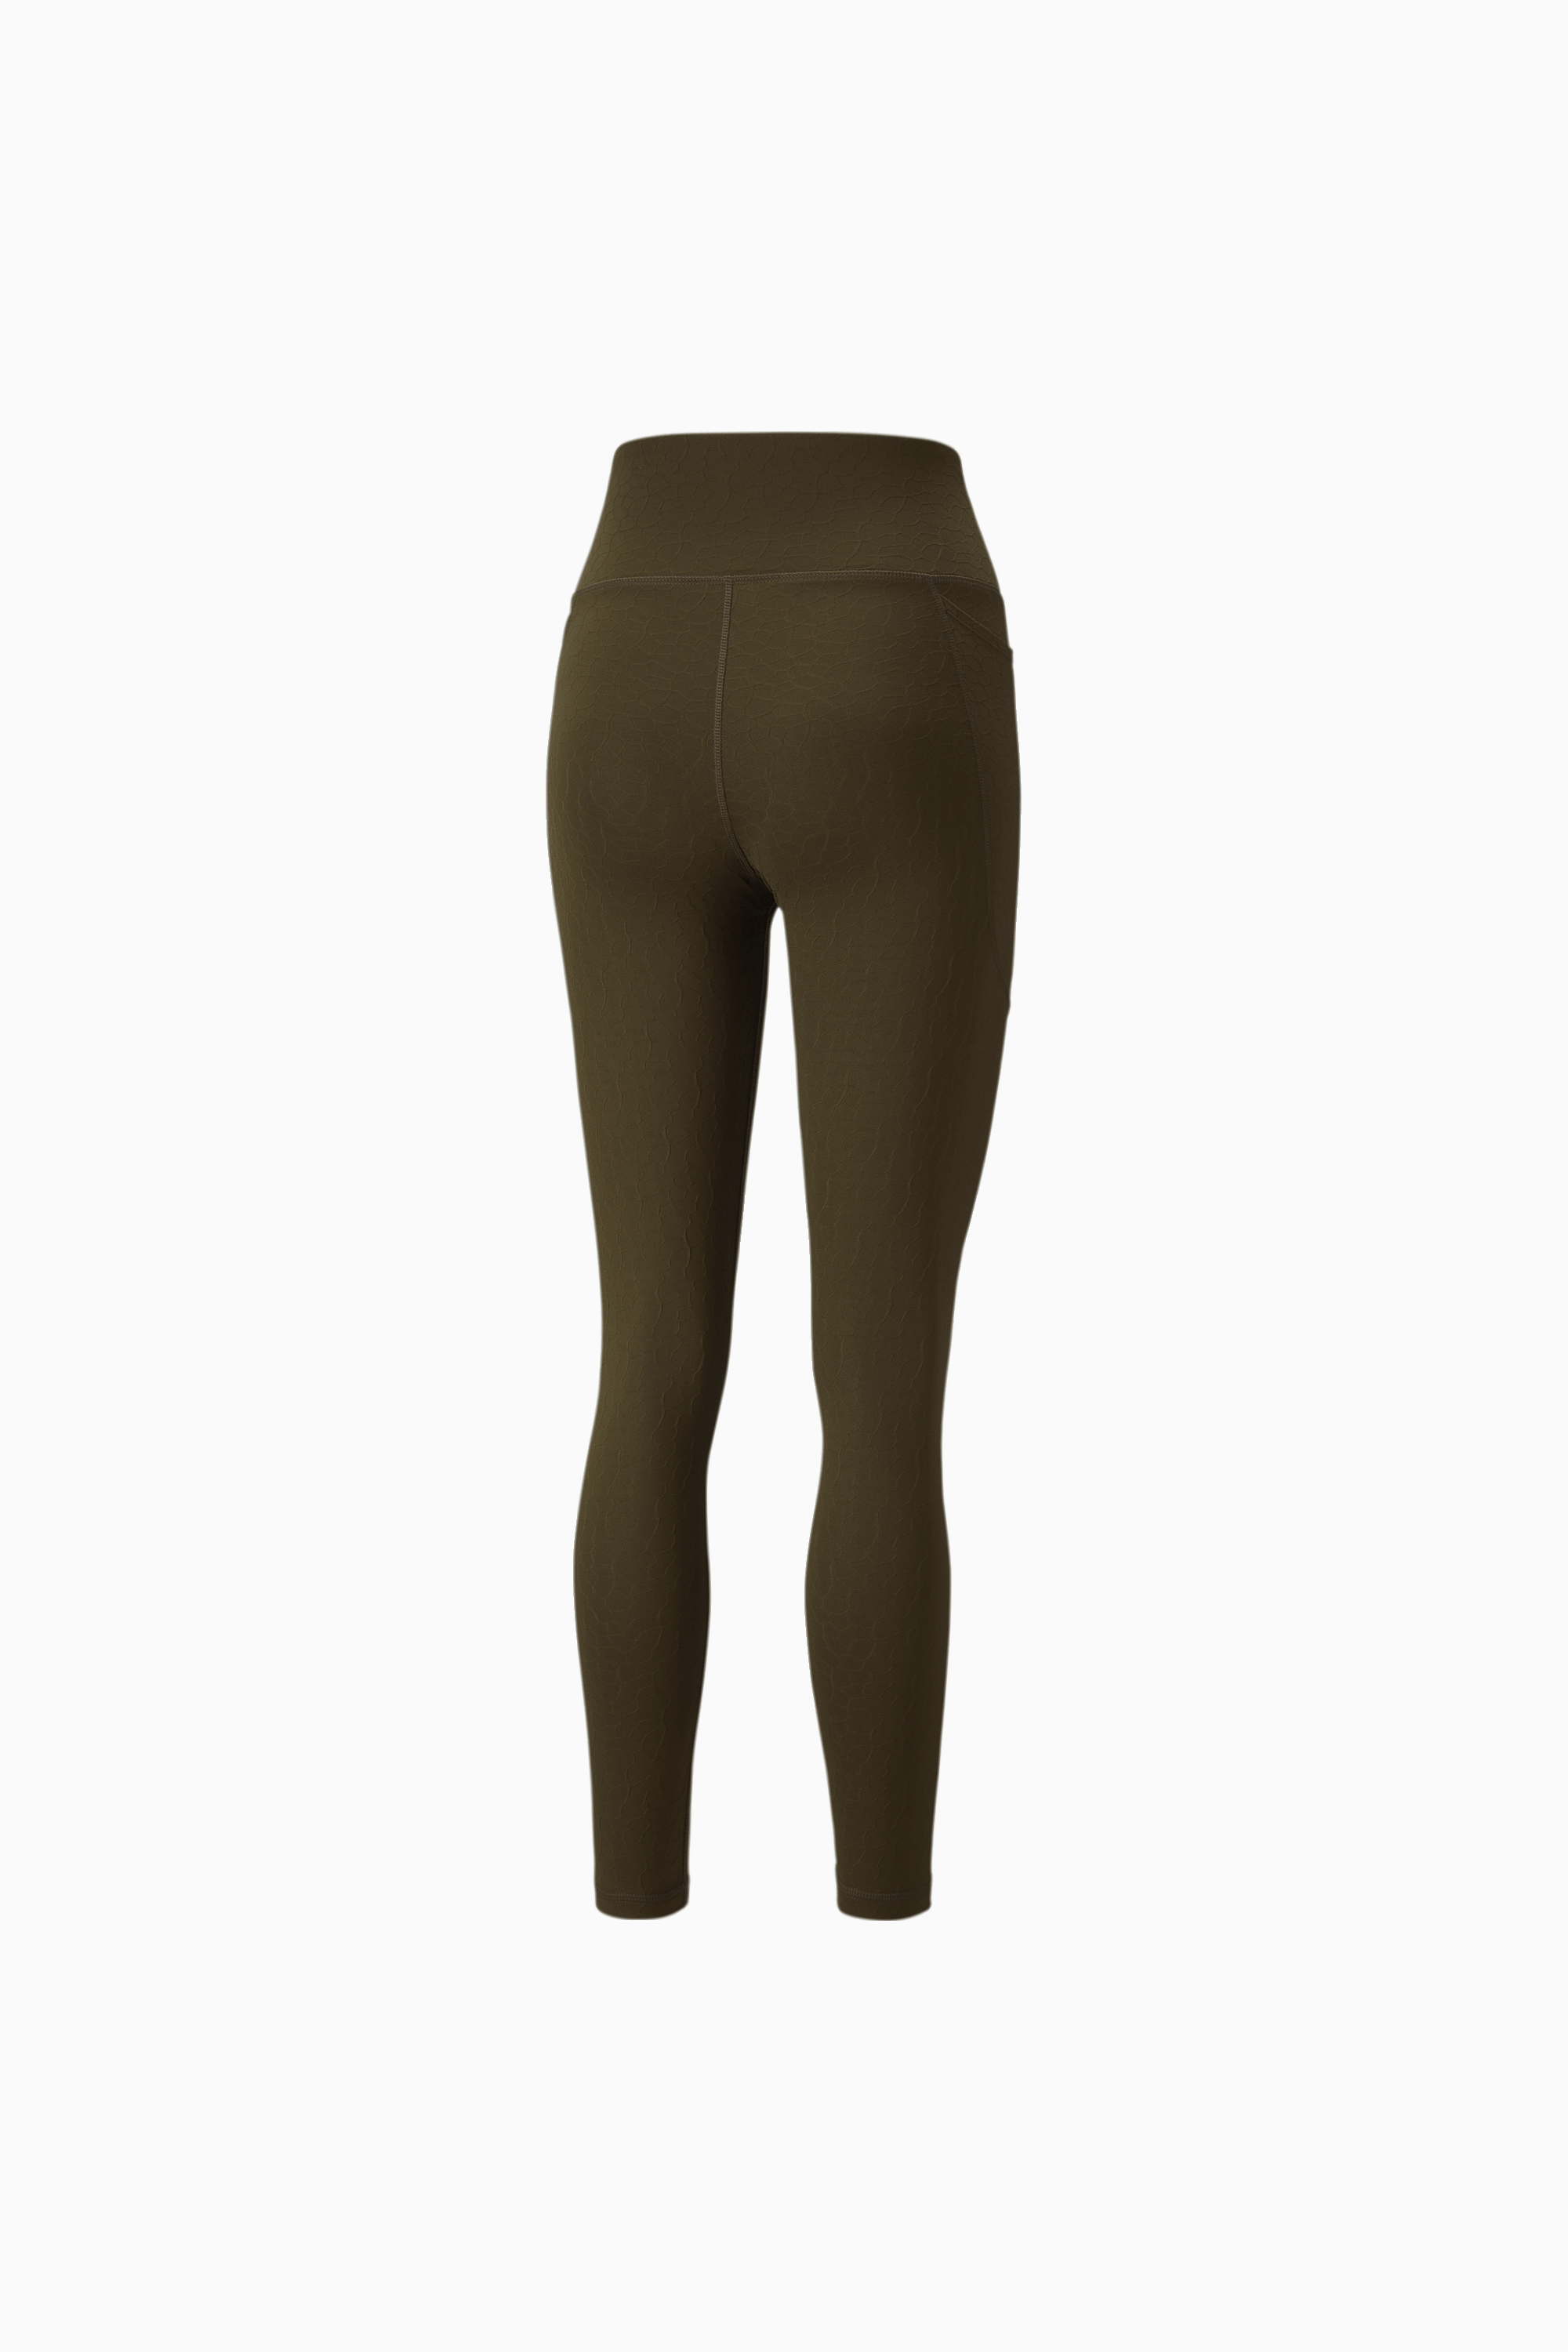 ENERBLOOM Cream Leggings for Women High Waisted Yoga Tights Tummy Control  Soft Workout Athletic 7/8 Length Pants with Inner Pocket Small, Olive  Green, S : Buy Online at Best Price in KSA 